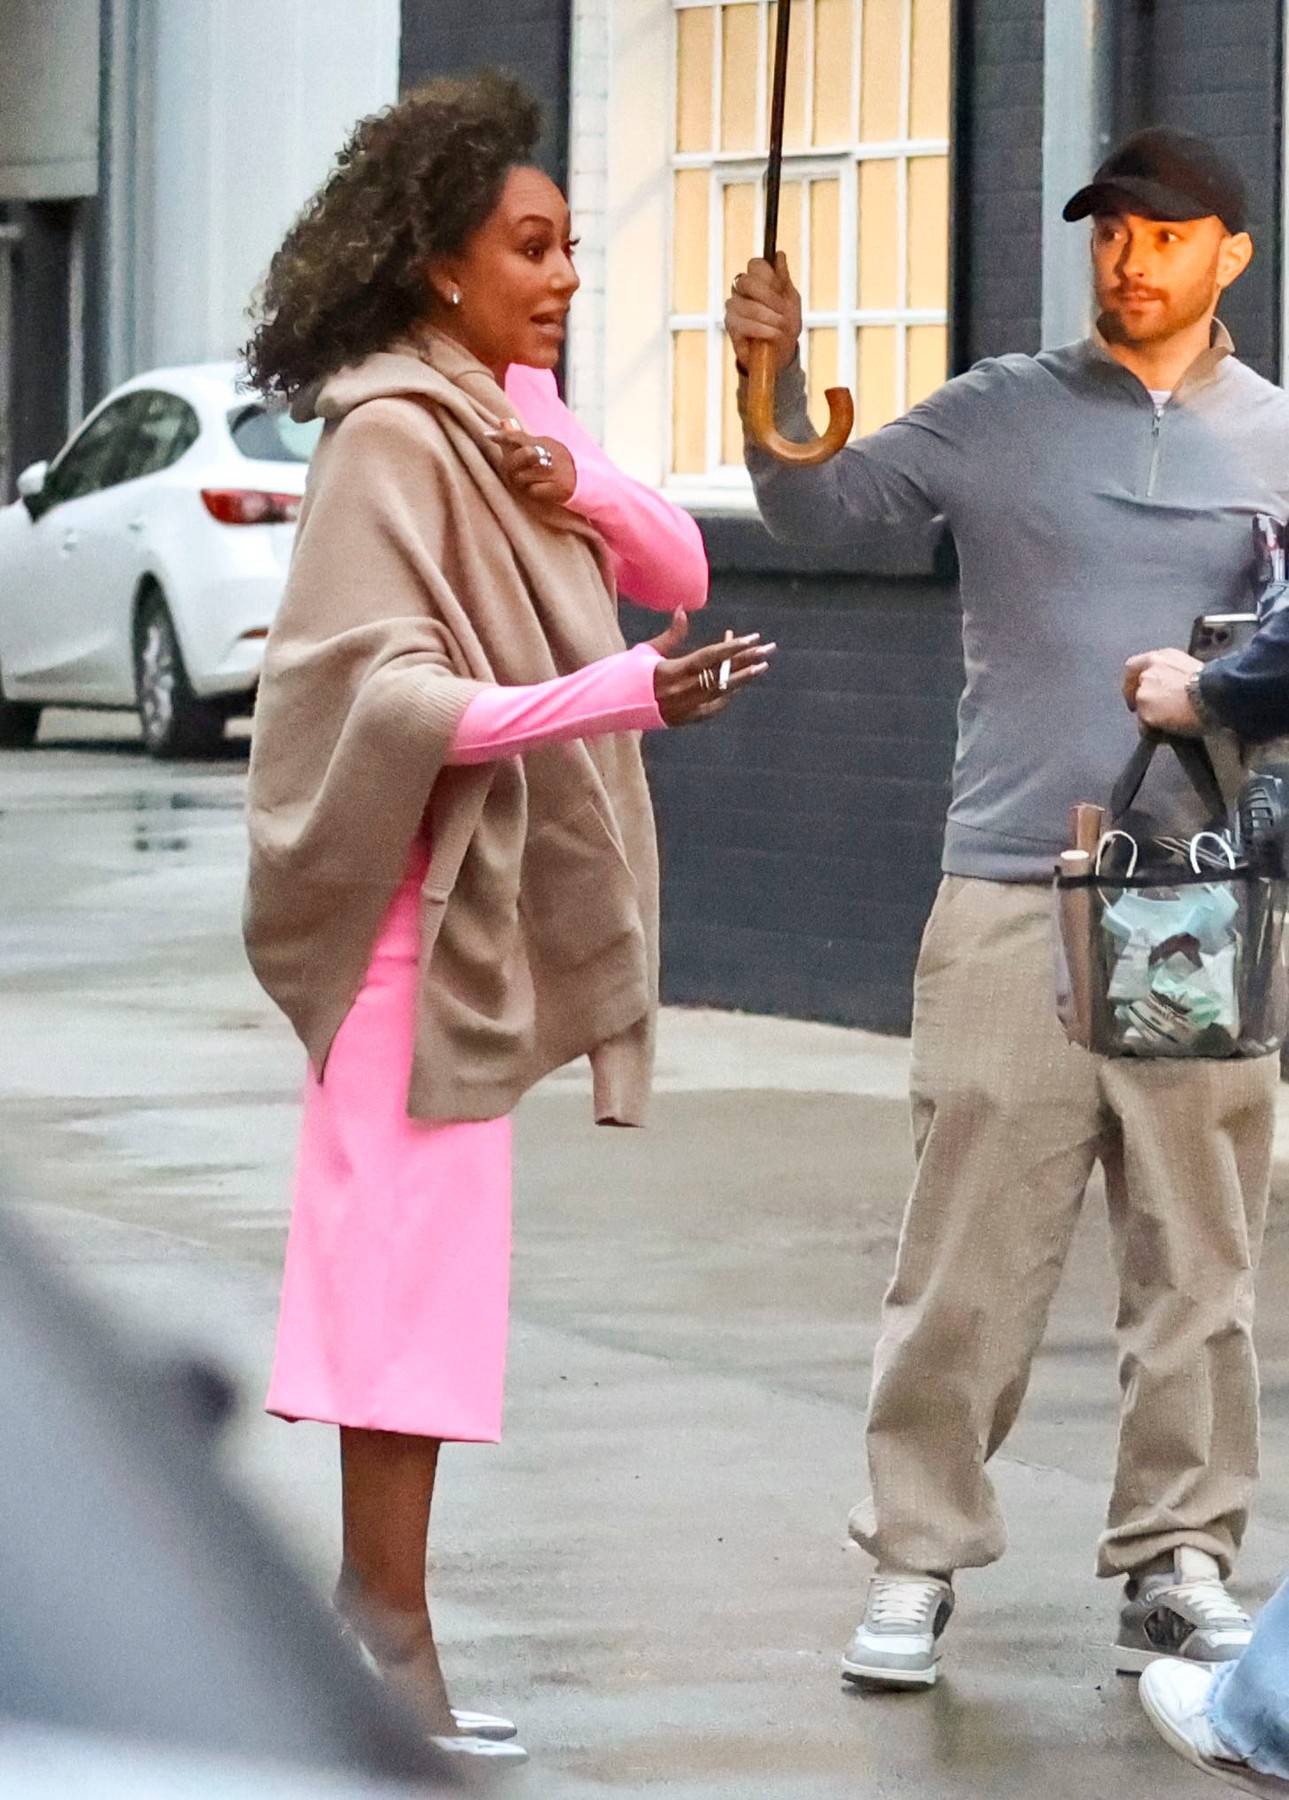 EXCLUSIVE: *NO DAILYMAIL ONLINE* Thighs The Limit! Mel B Shows Off Her Some Leg In A High Cut Hot Pink Dress, Stopping To "Get The Shot" In The Rain, While Leaving A Glamorous Photoshoot In Sydney